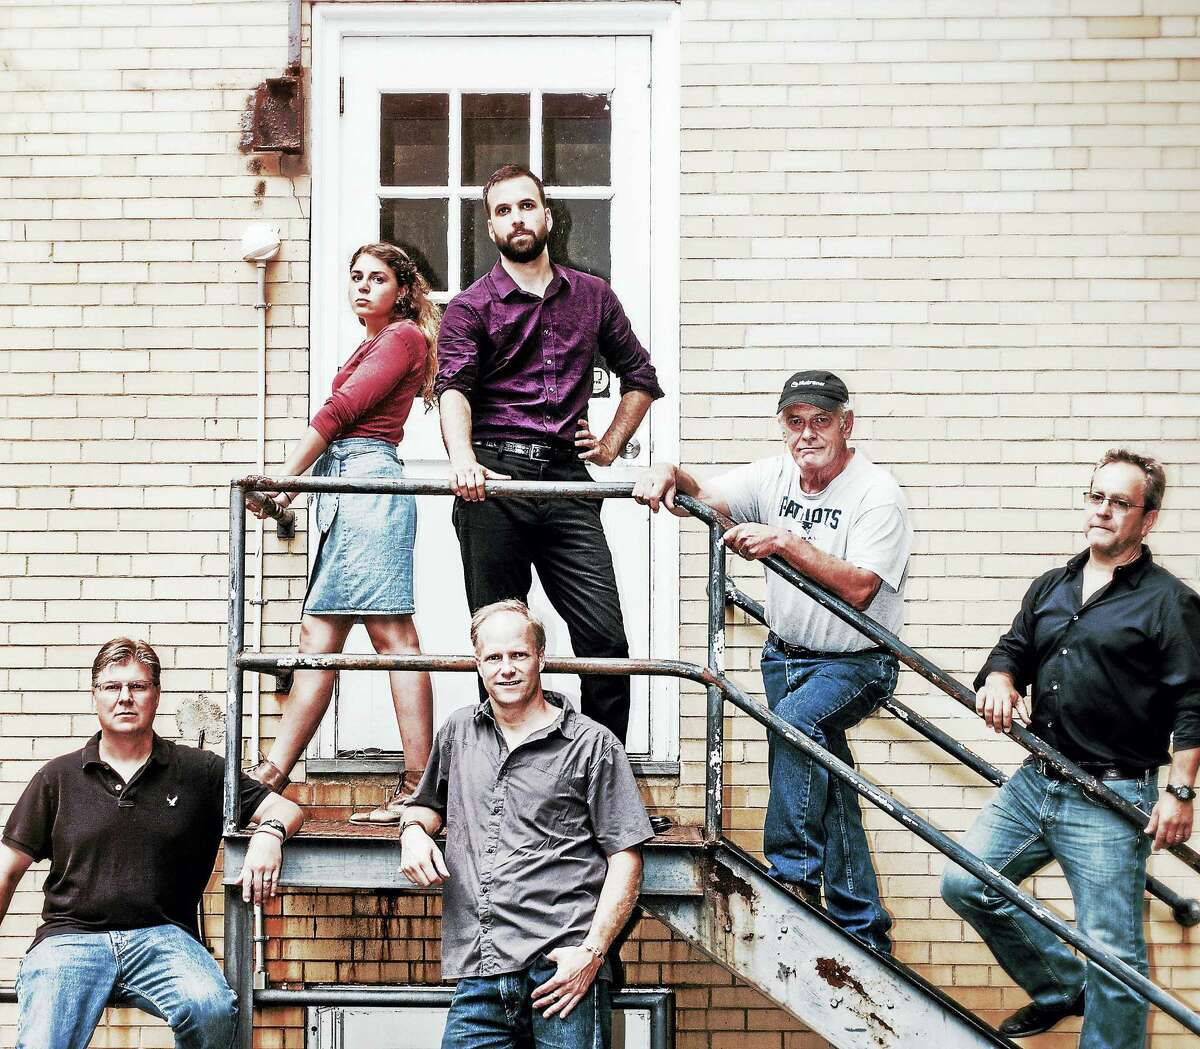 Plywood Cowboy will sing of heartbreak and hound dogs on Saturday at The Kate.